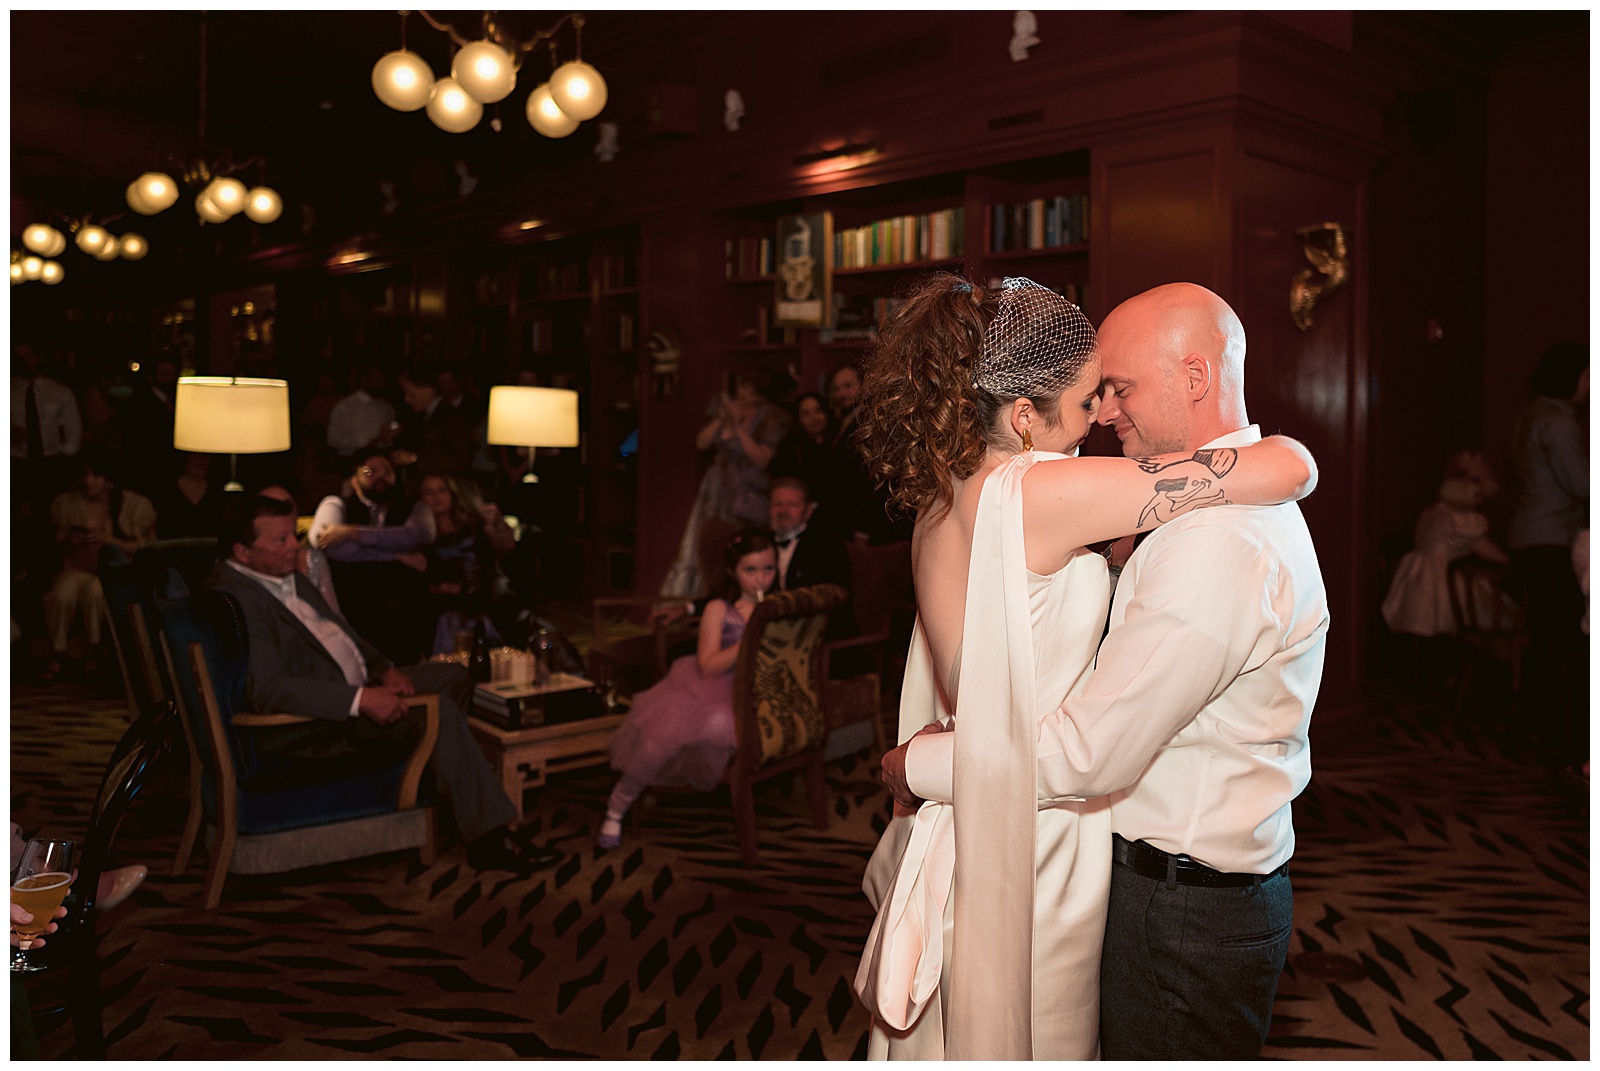 A couple embraces during their first dance.